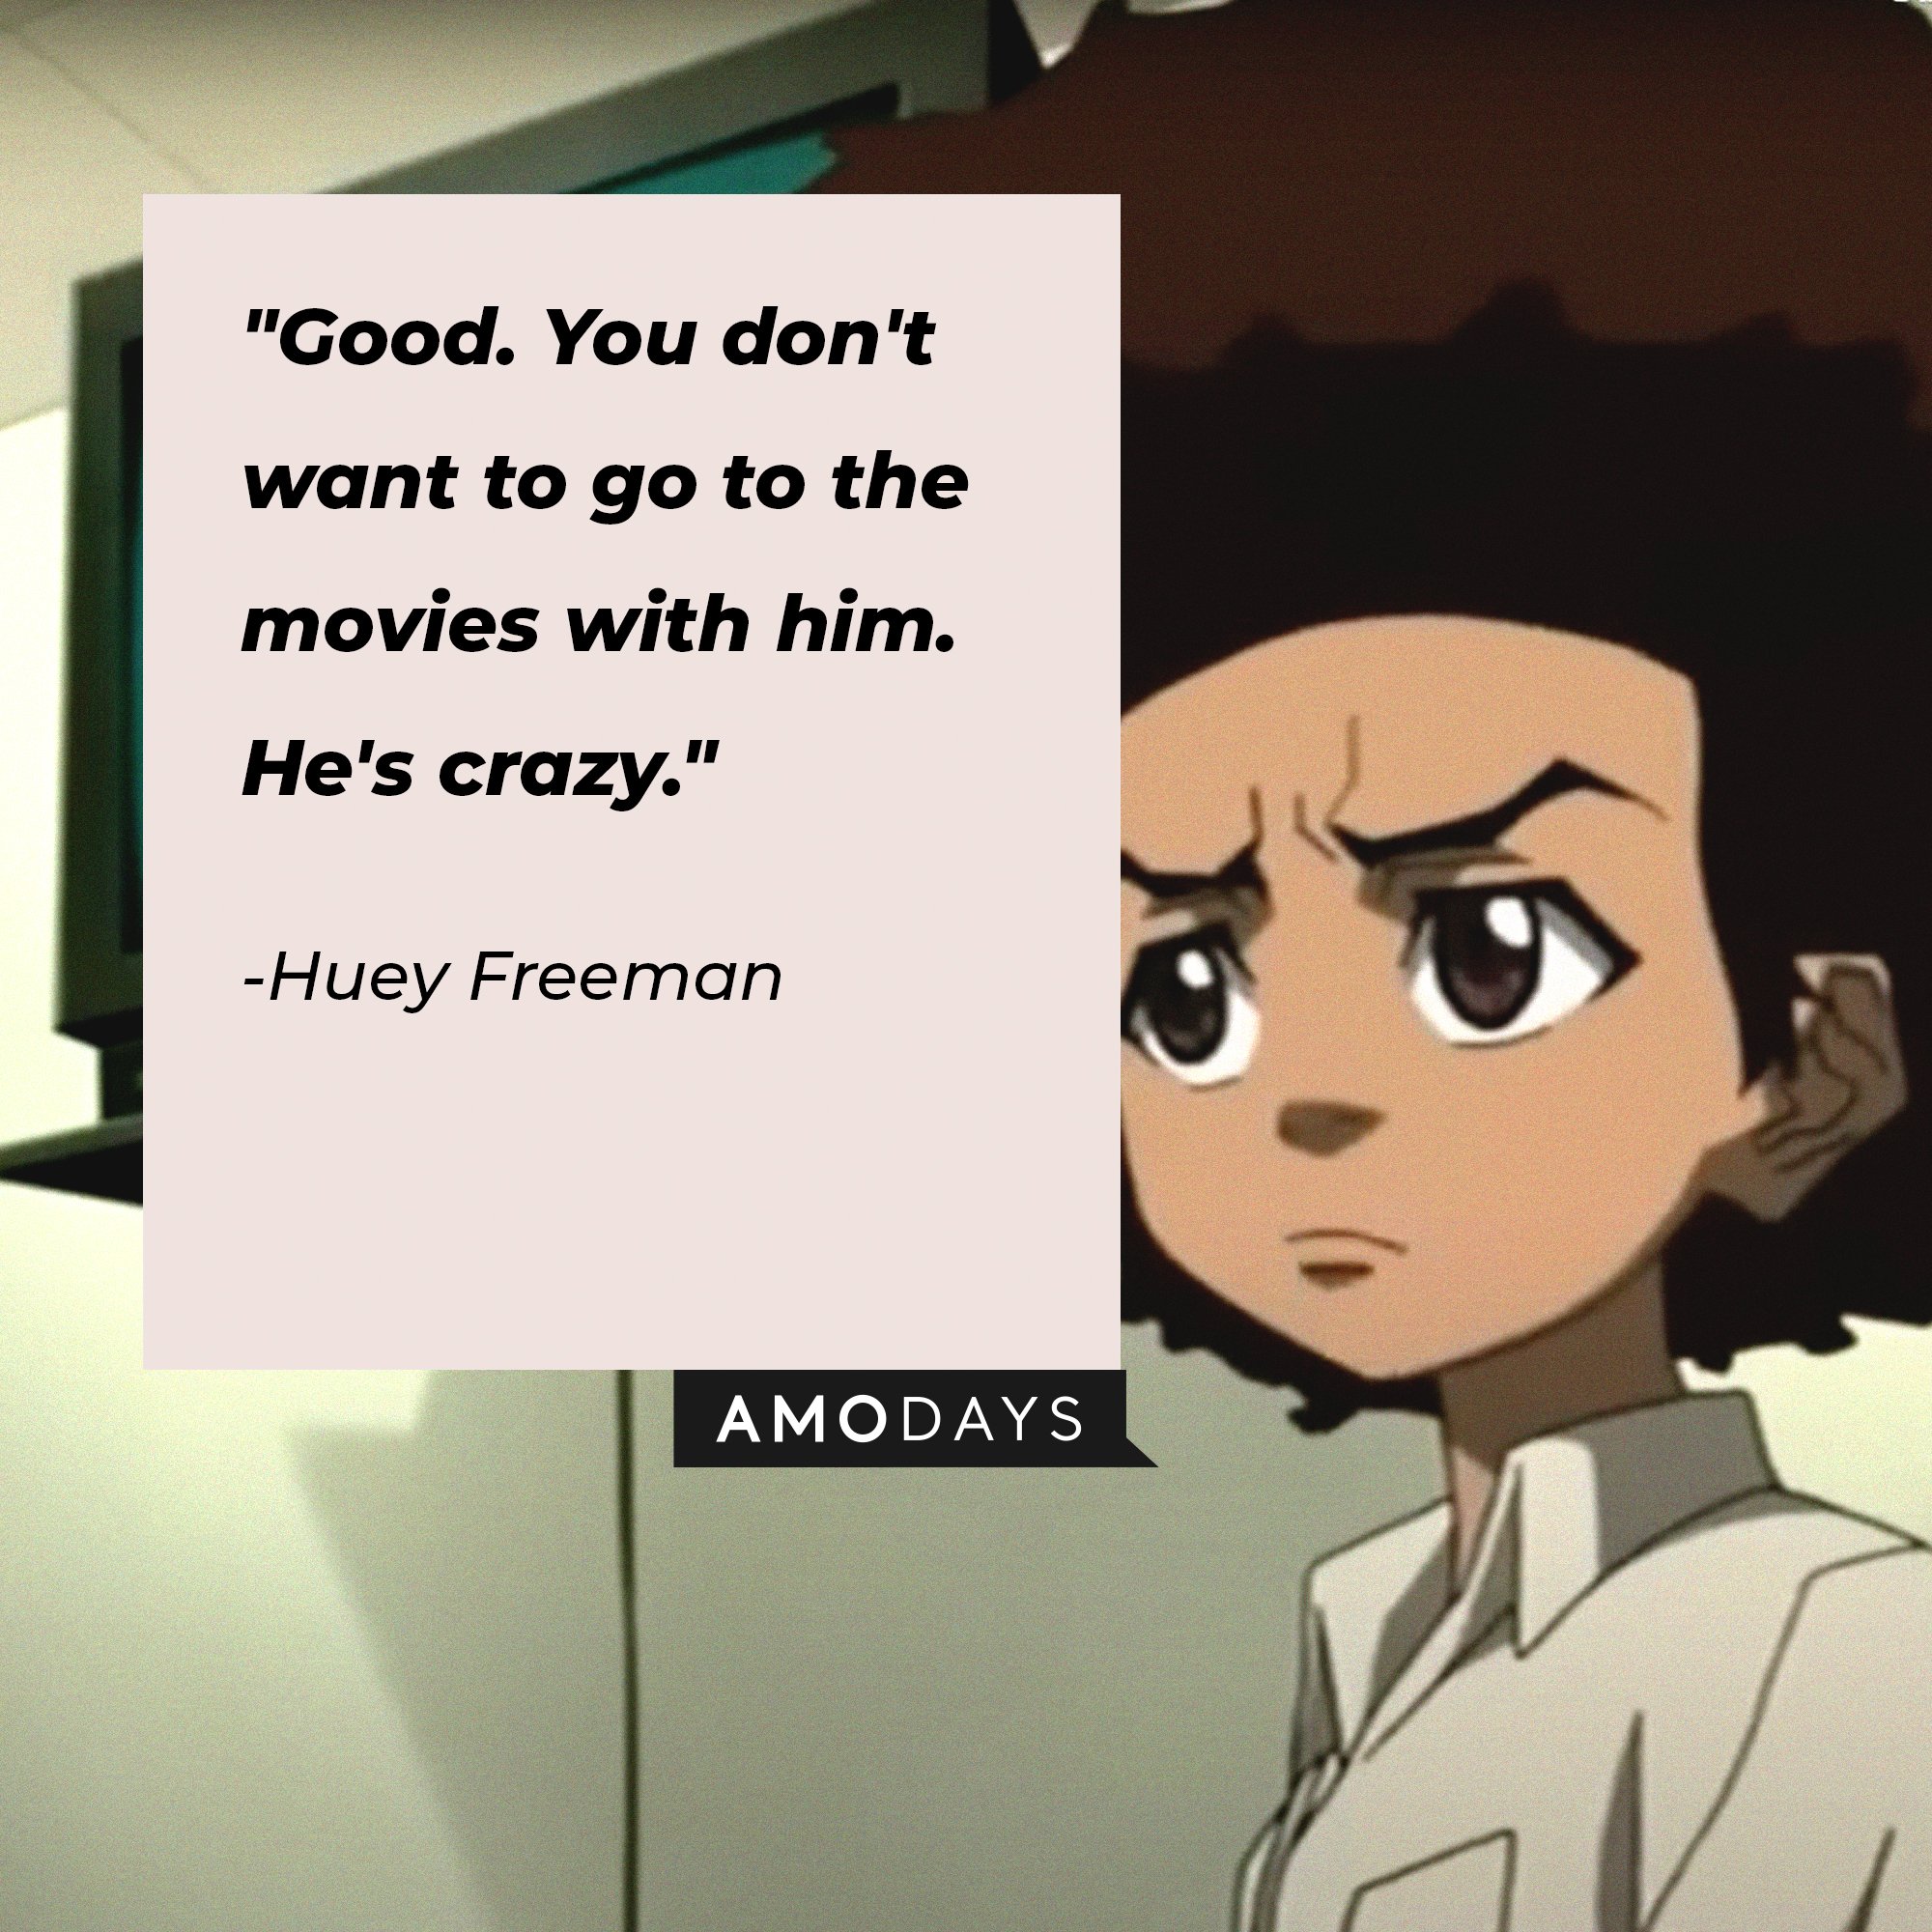 Huey Freeman's quote: "Good. You don't want to go to the movies with him. He's crazy." | Image: AmoDays